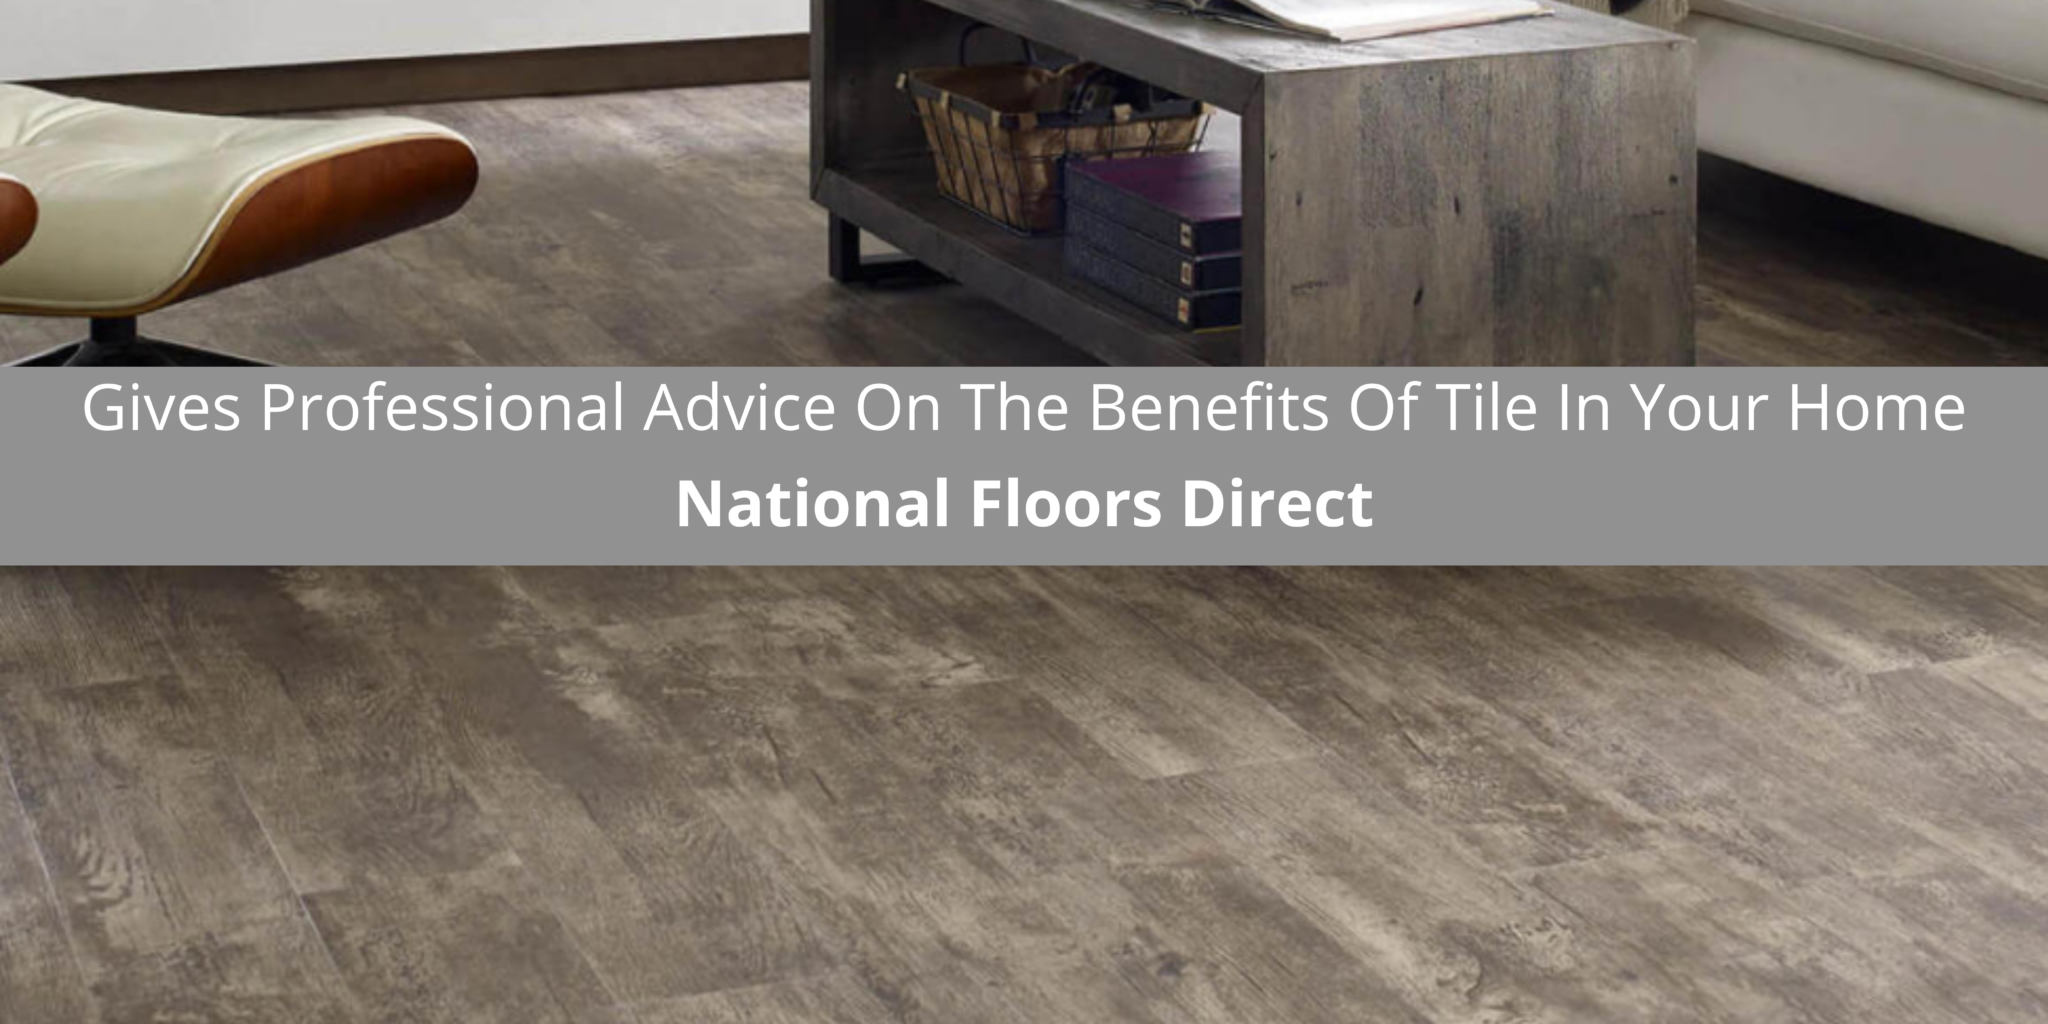 National Floors Direct Gives Professional Advice On The Benefits Of ...